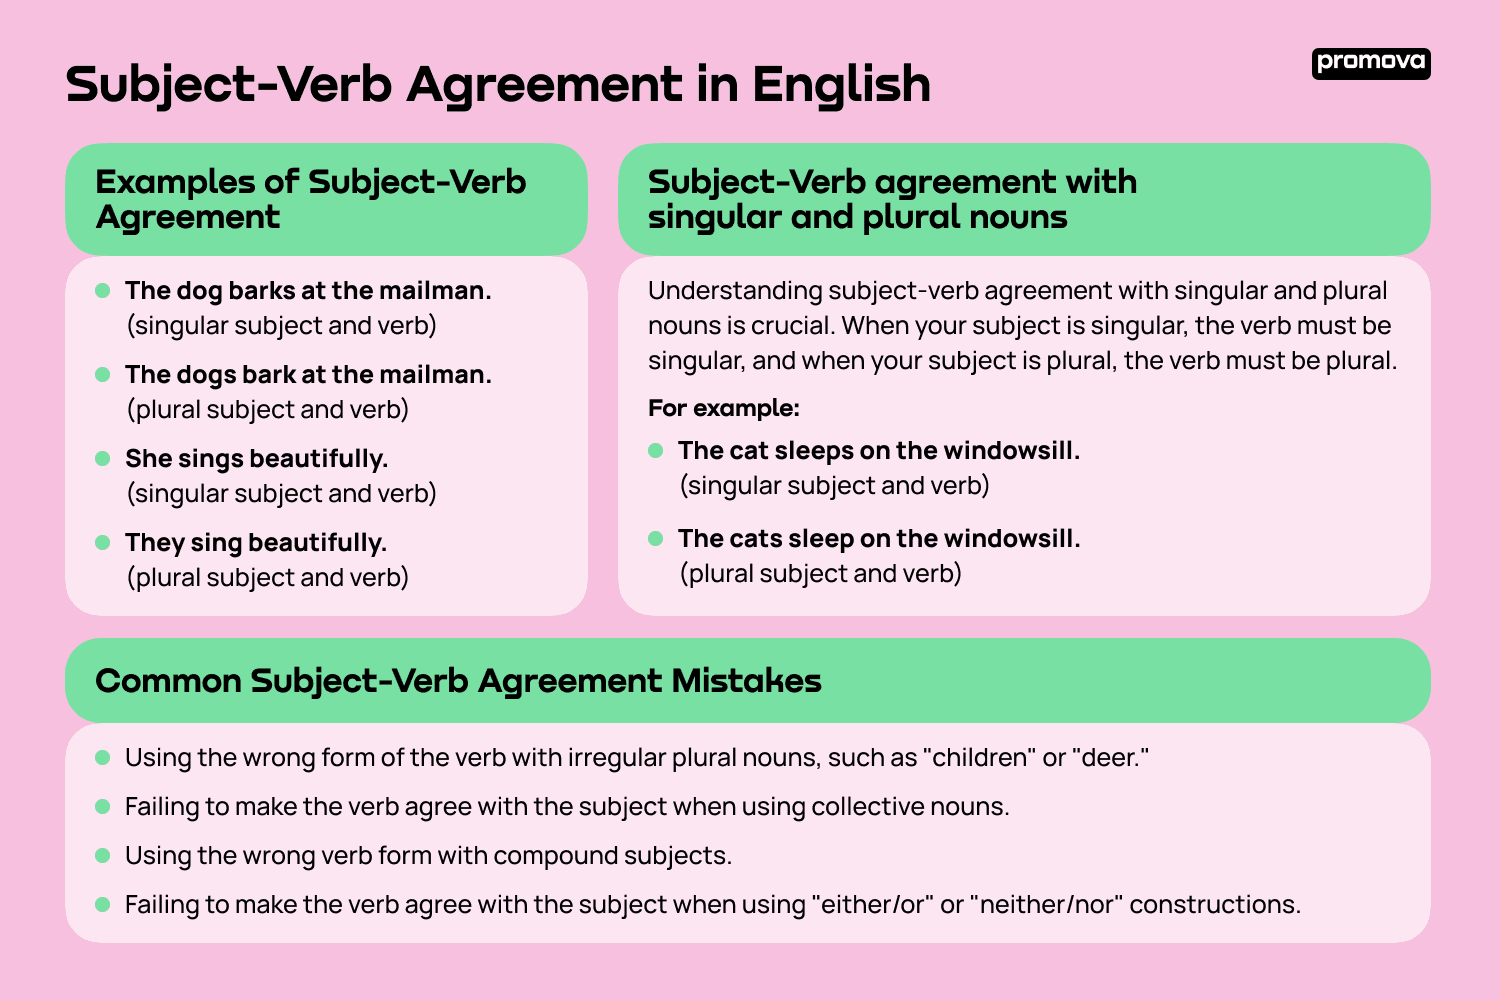 Examples of Subject-Verb Agreement